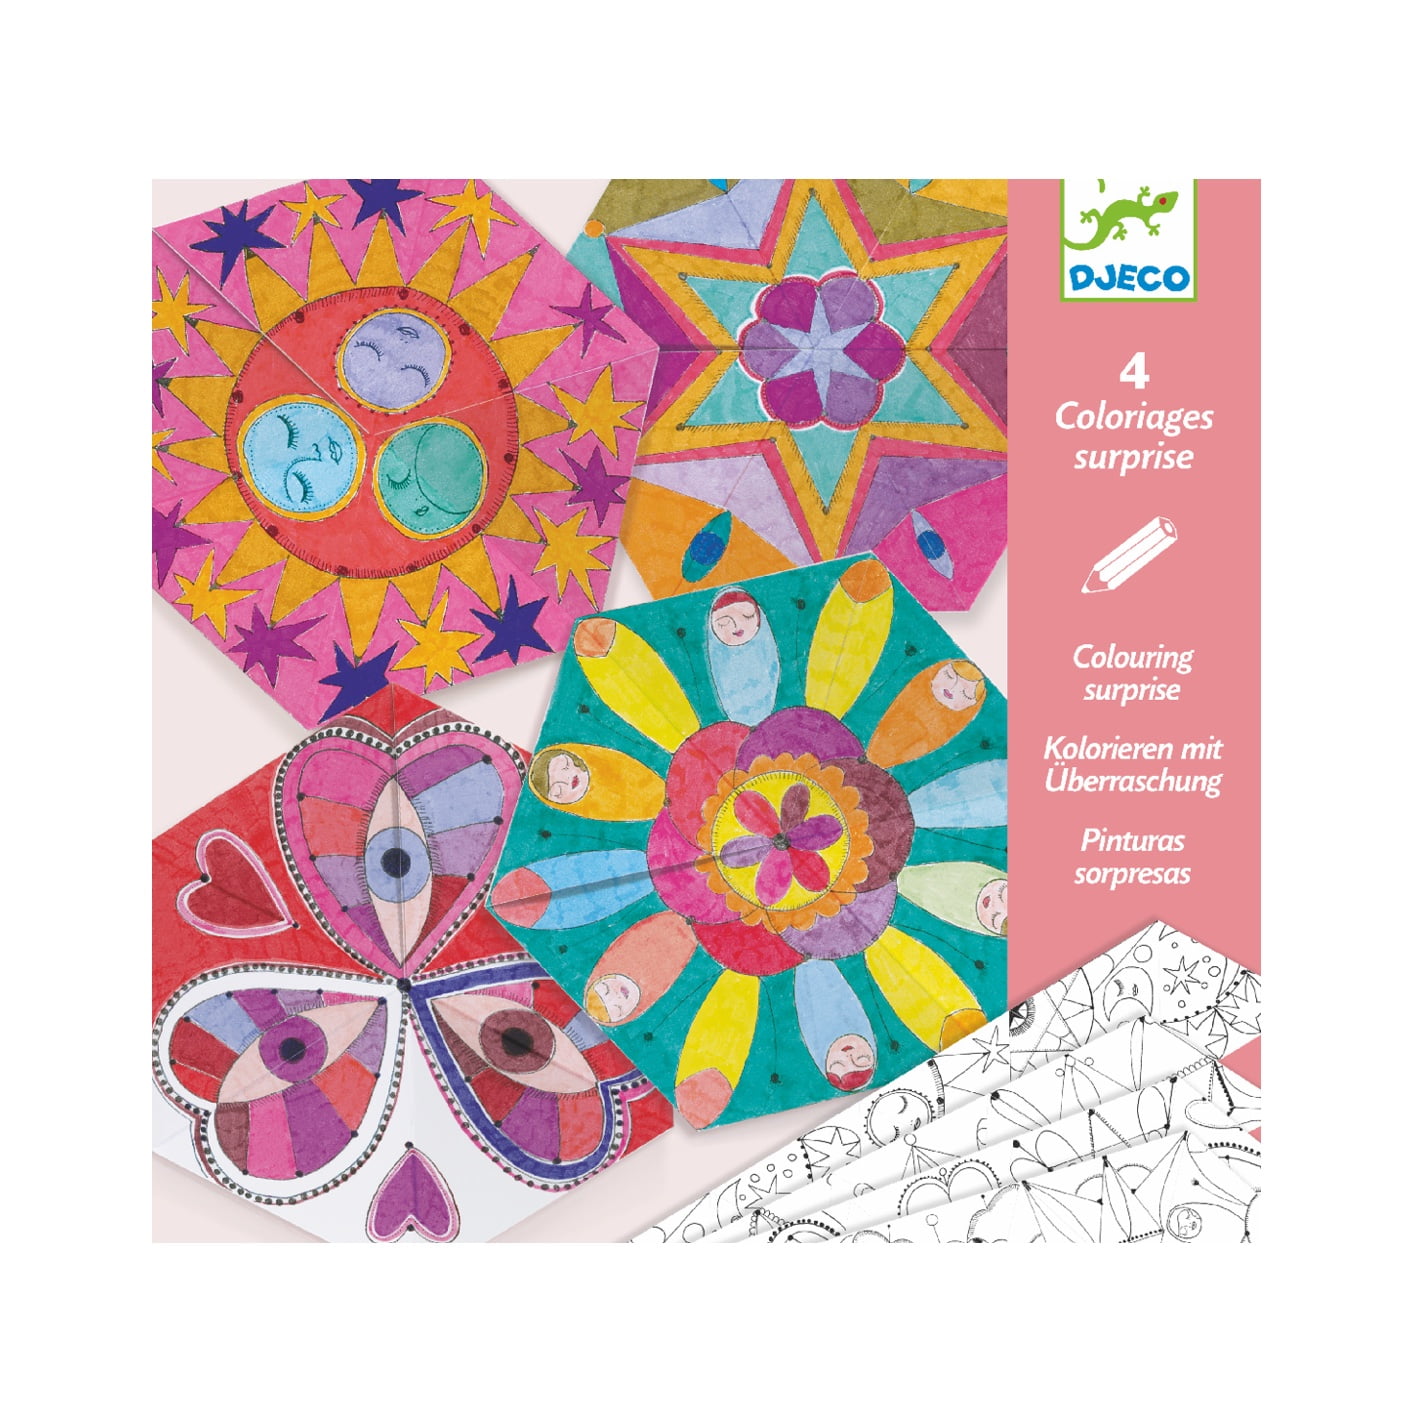 Coloring with a surprise - Star mandalas